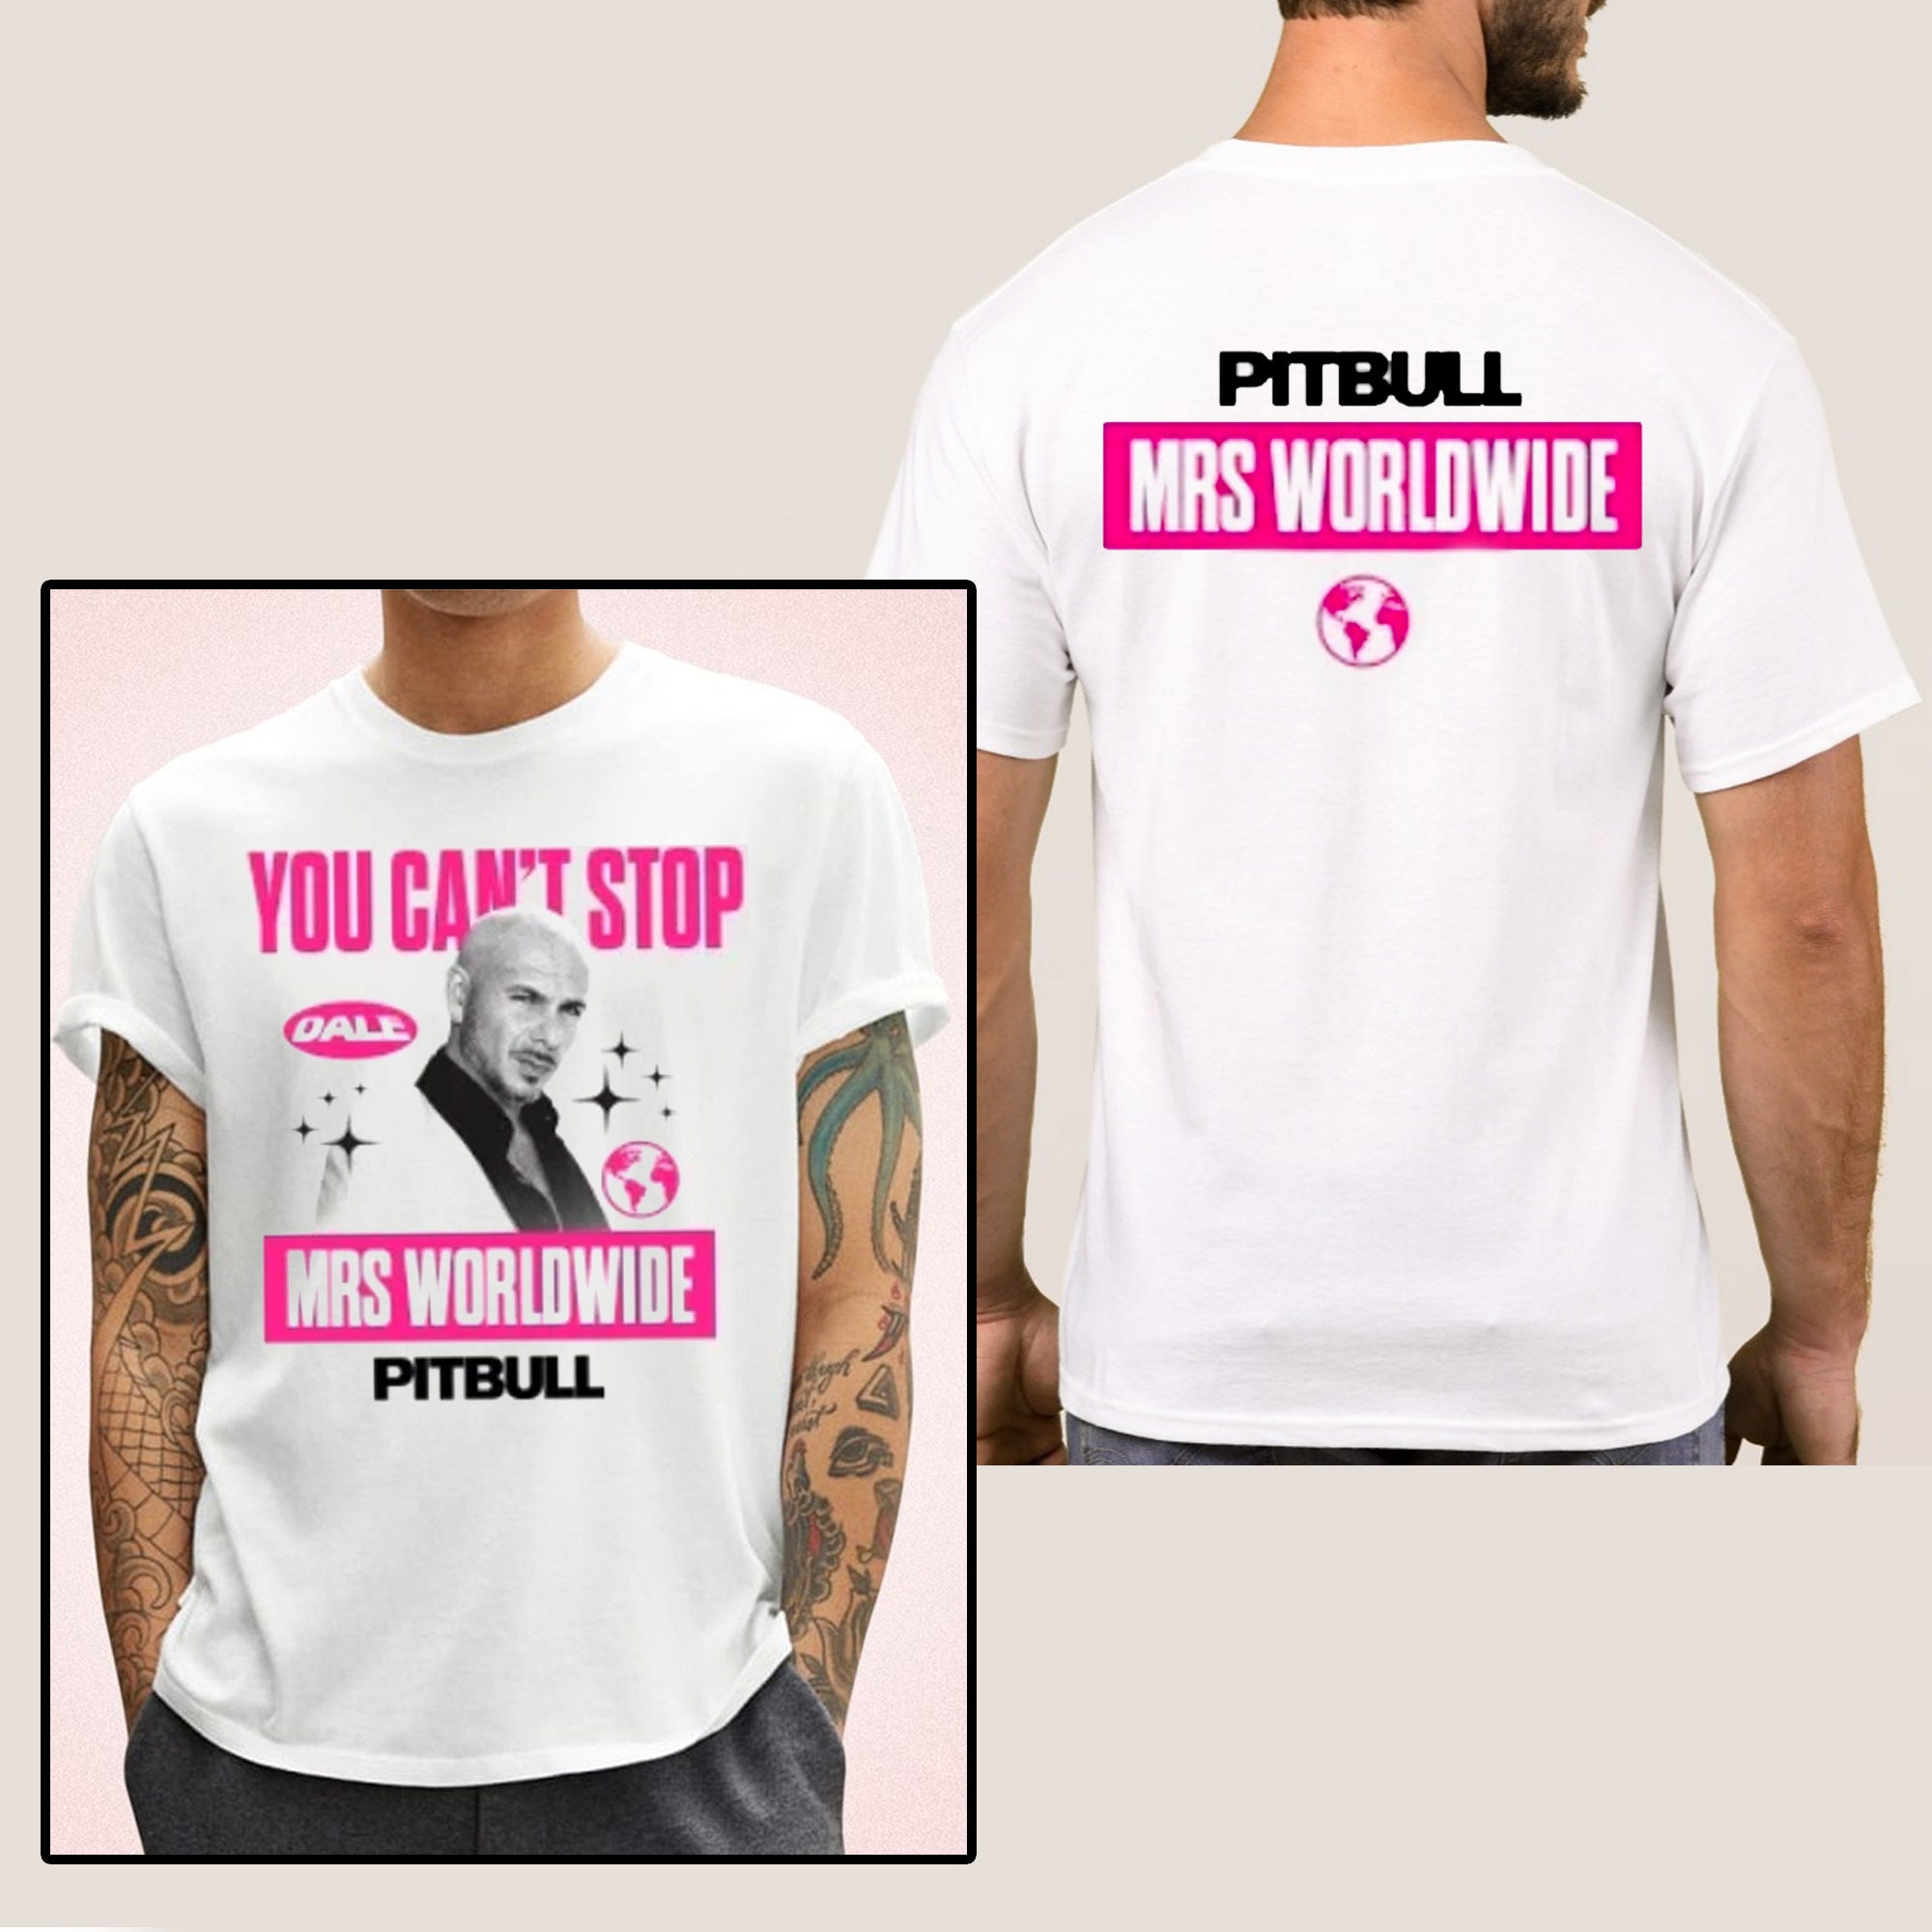 Discover Pitbull Can't Stop Us Now Summer Tour Zweiseitiges T-Shirt